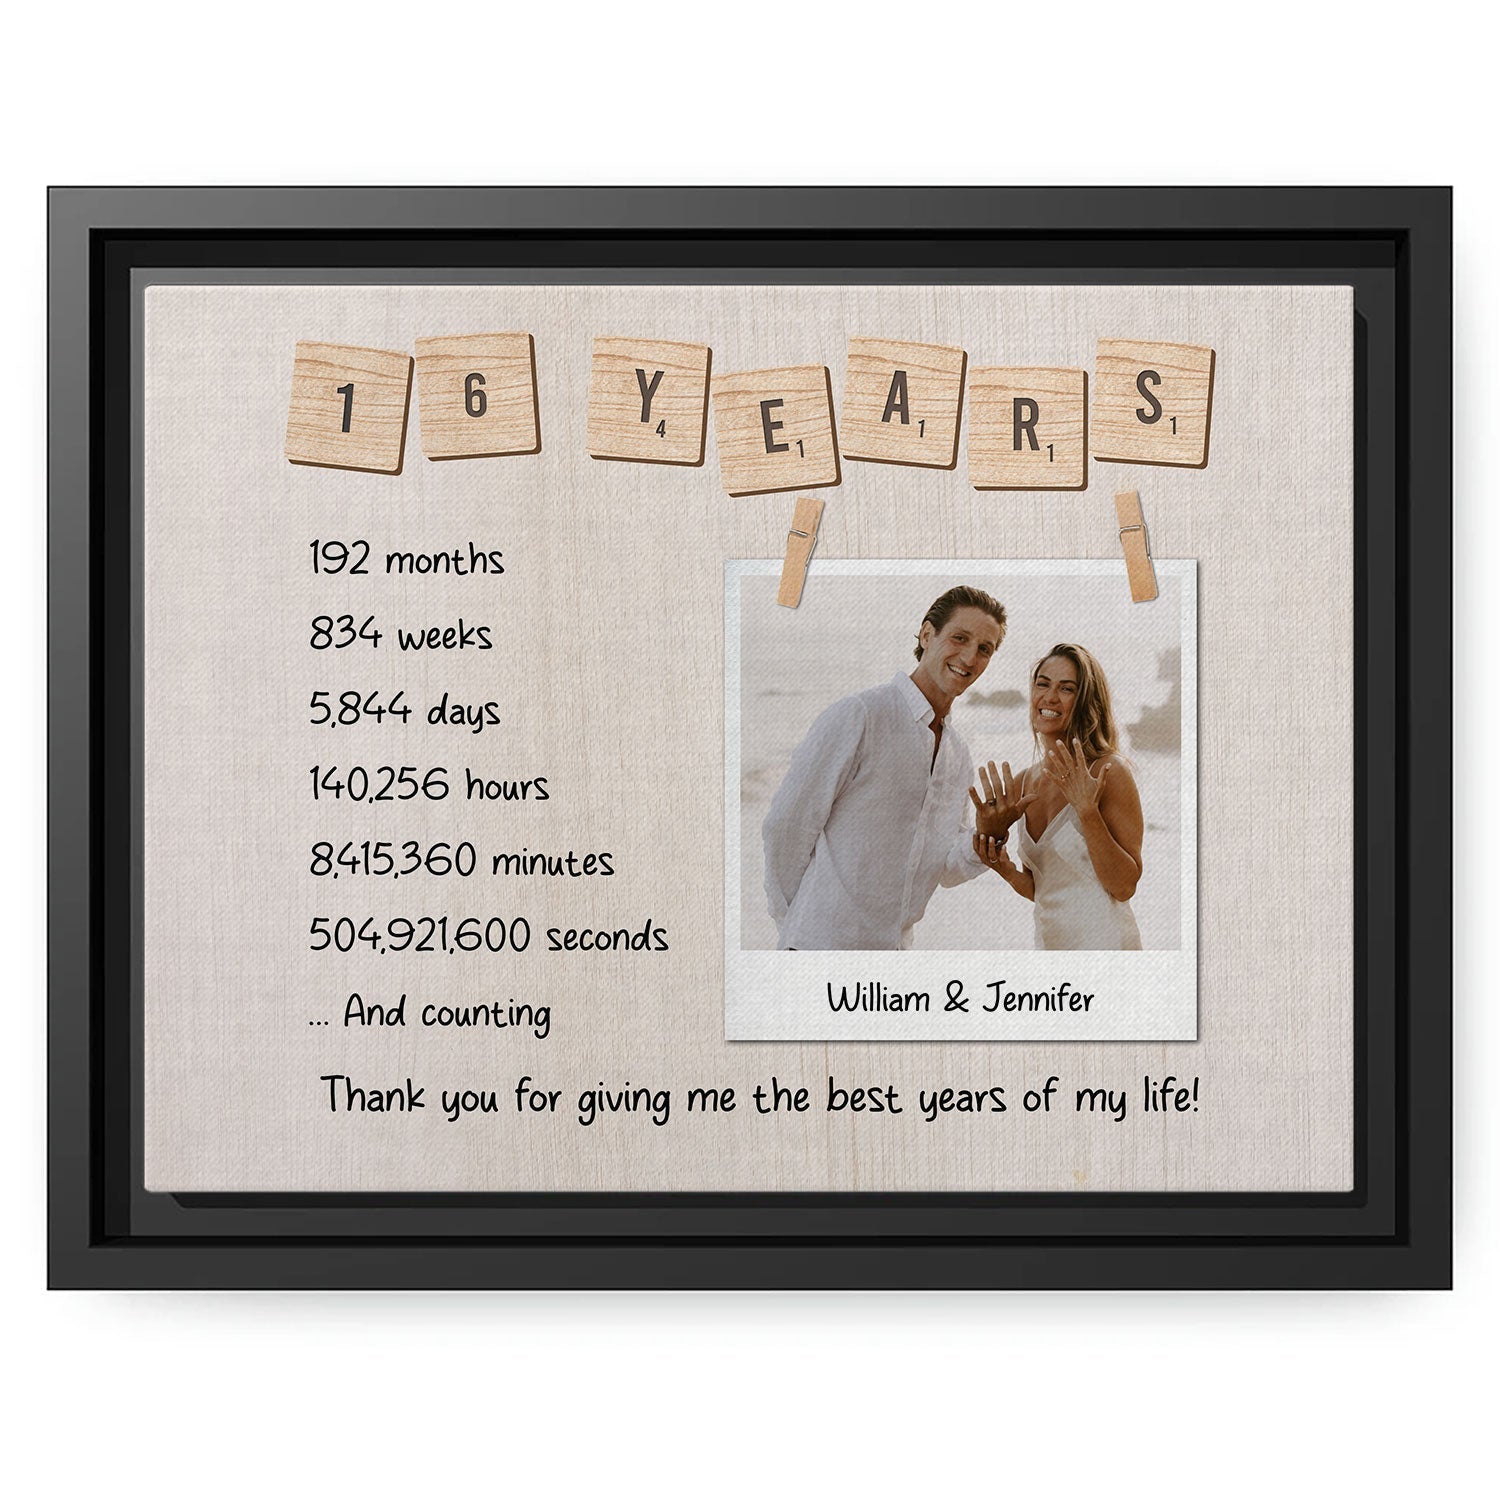 16 Years - Personalized 16 Year Anniversary gift For Husband or Wife - Custom Canvas Print - MyMindfulGifts